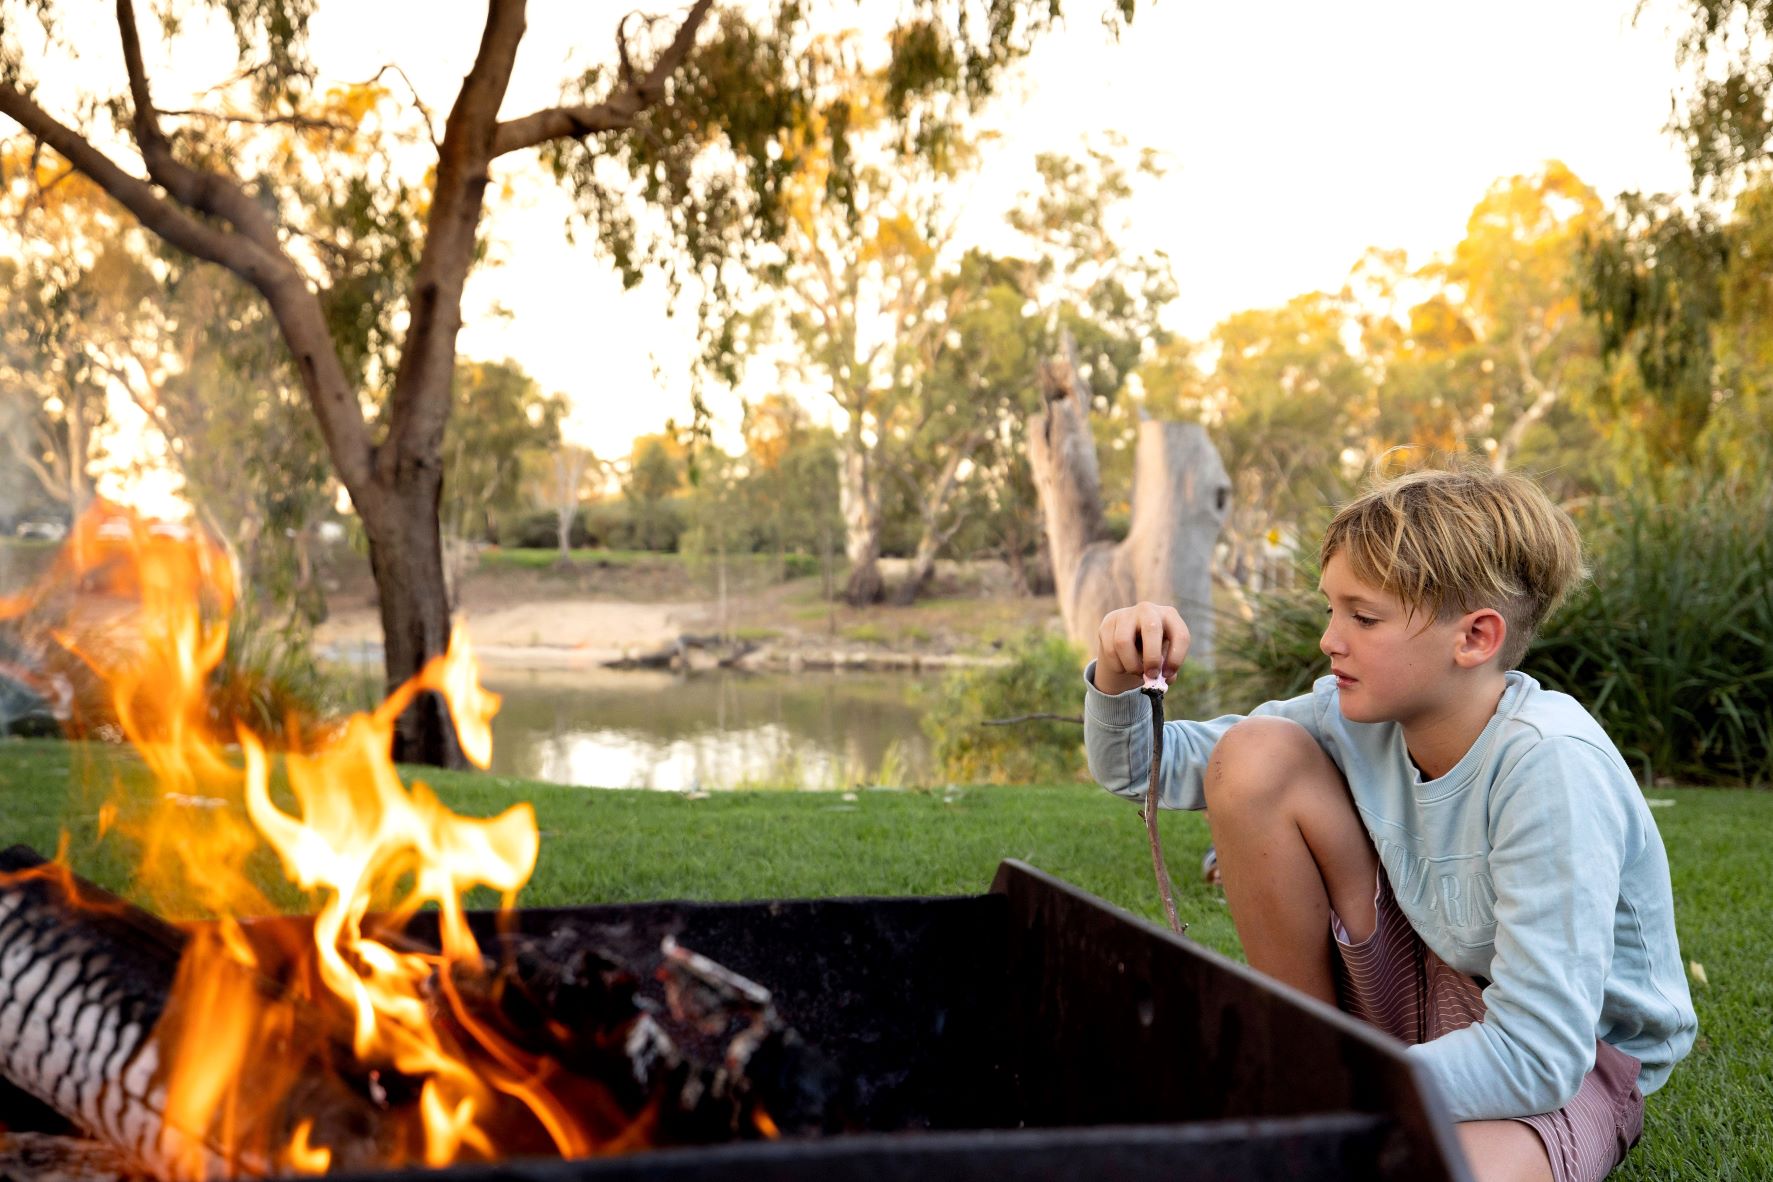 Must-do activities for a first camping trip